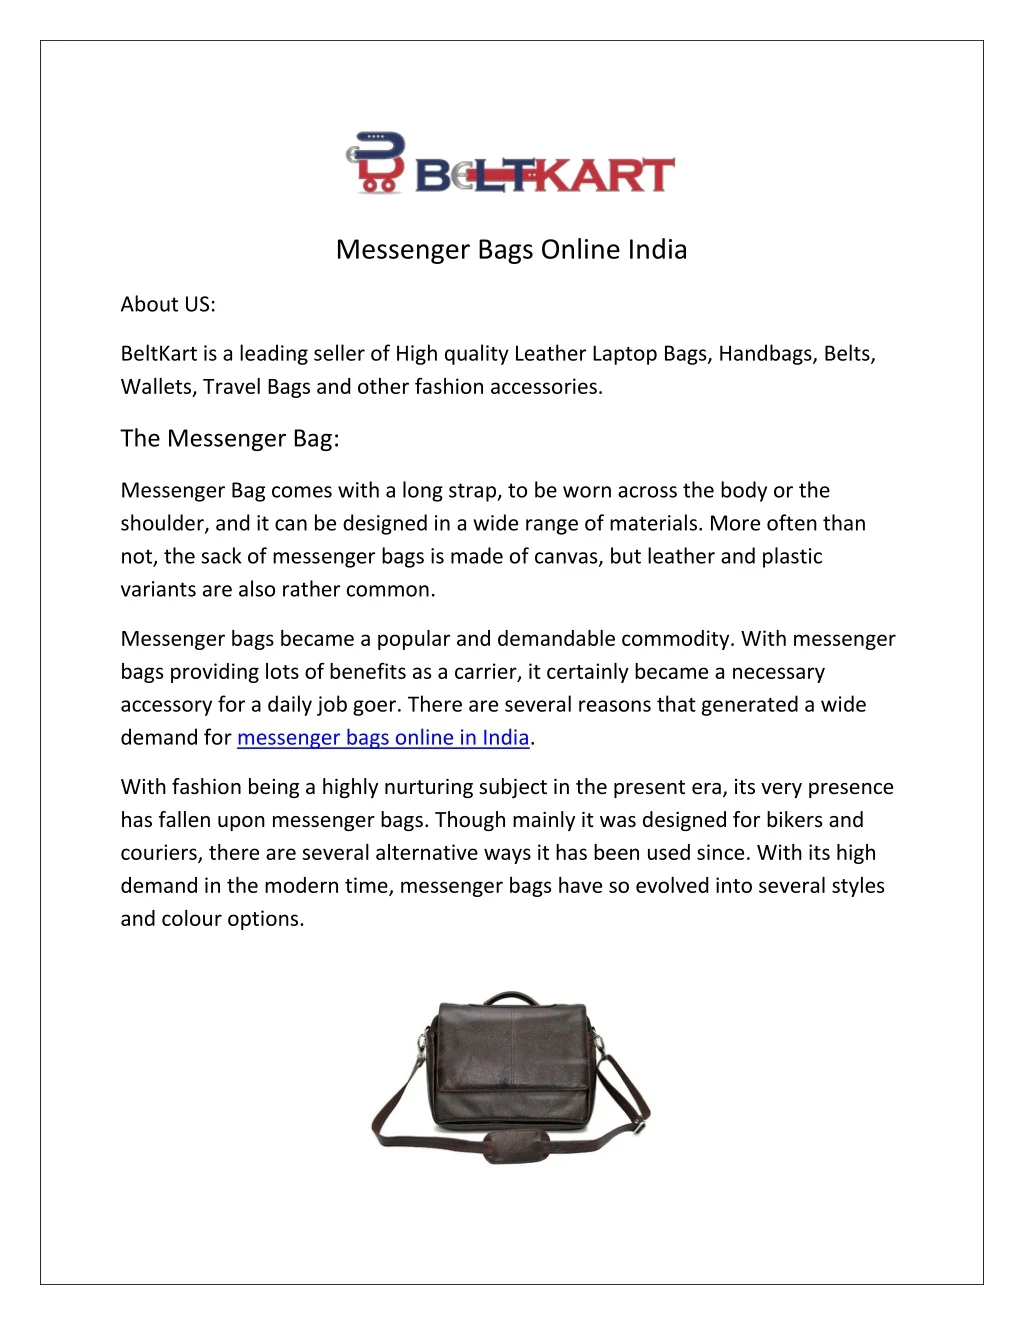 messenger bags online india